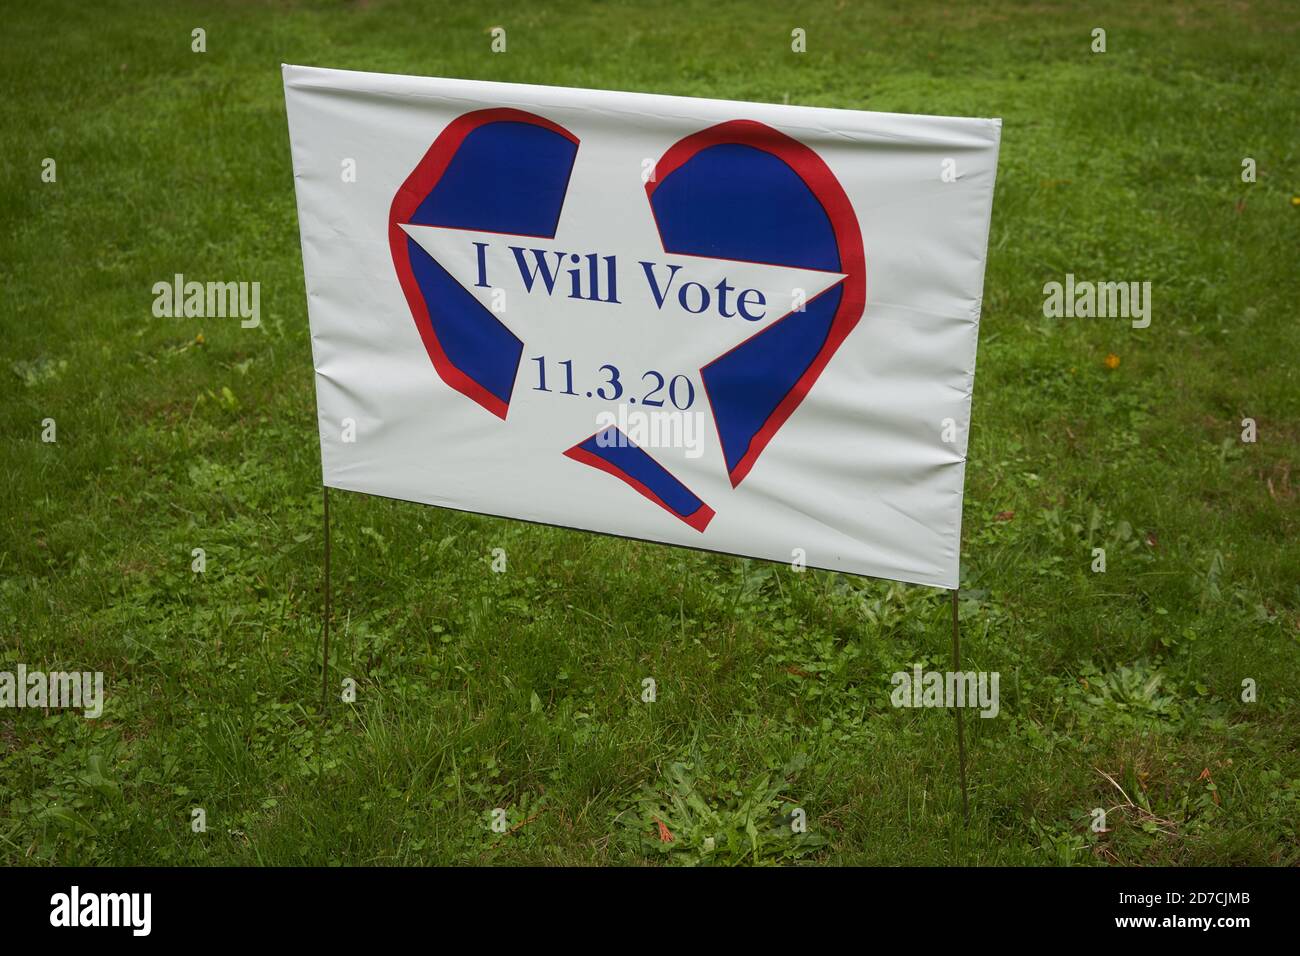 I Will Vote banner on the lawn outside a house in Lake Oswego, Oregon, seen on Wednesday, October 21, 2020, as the Election Day nears. Stock Photo